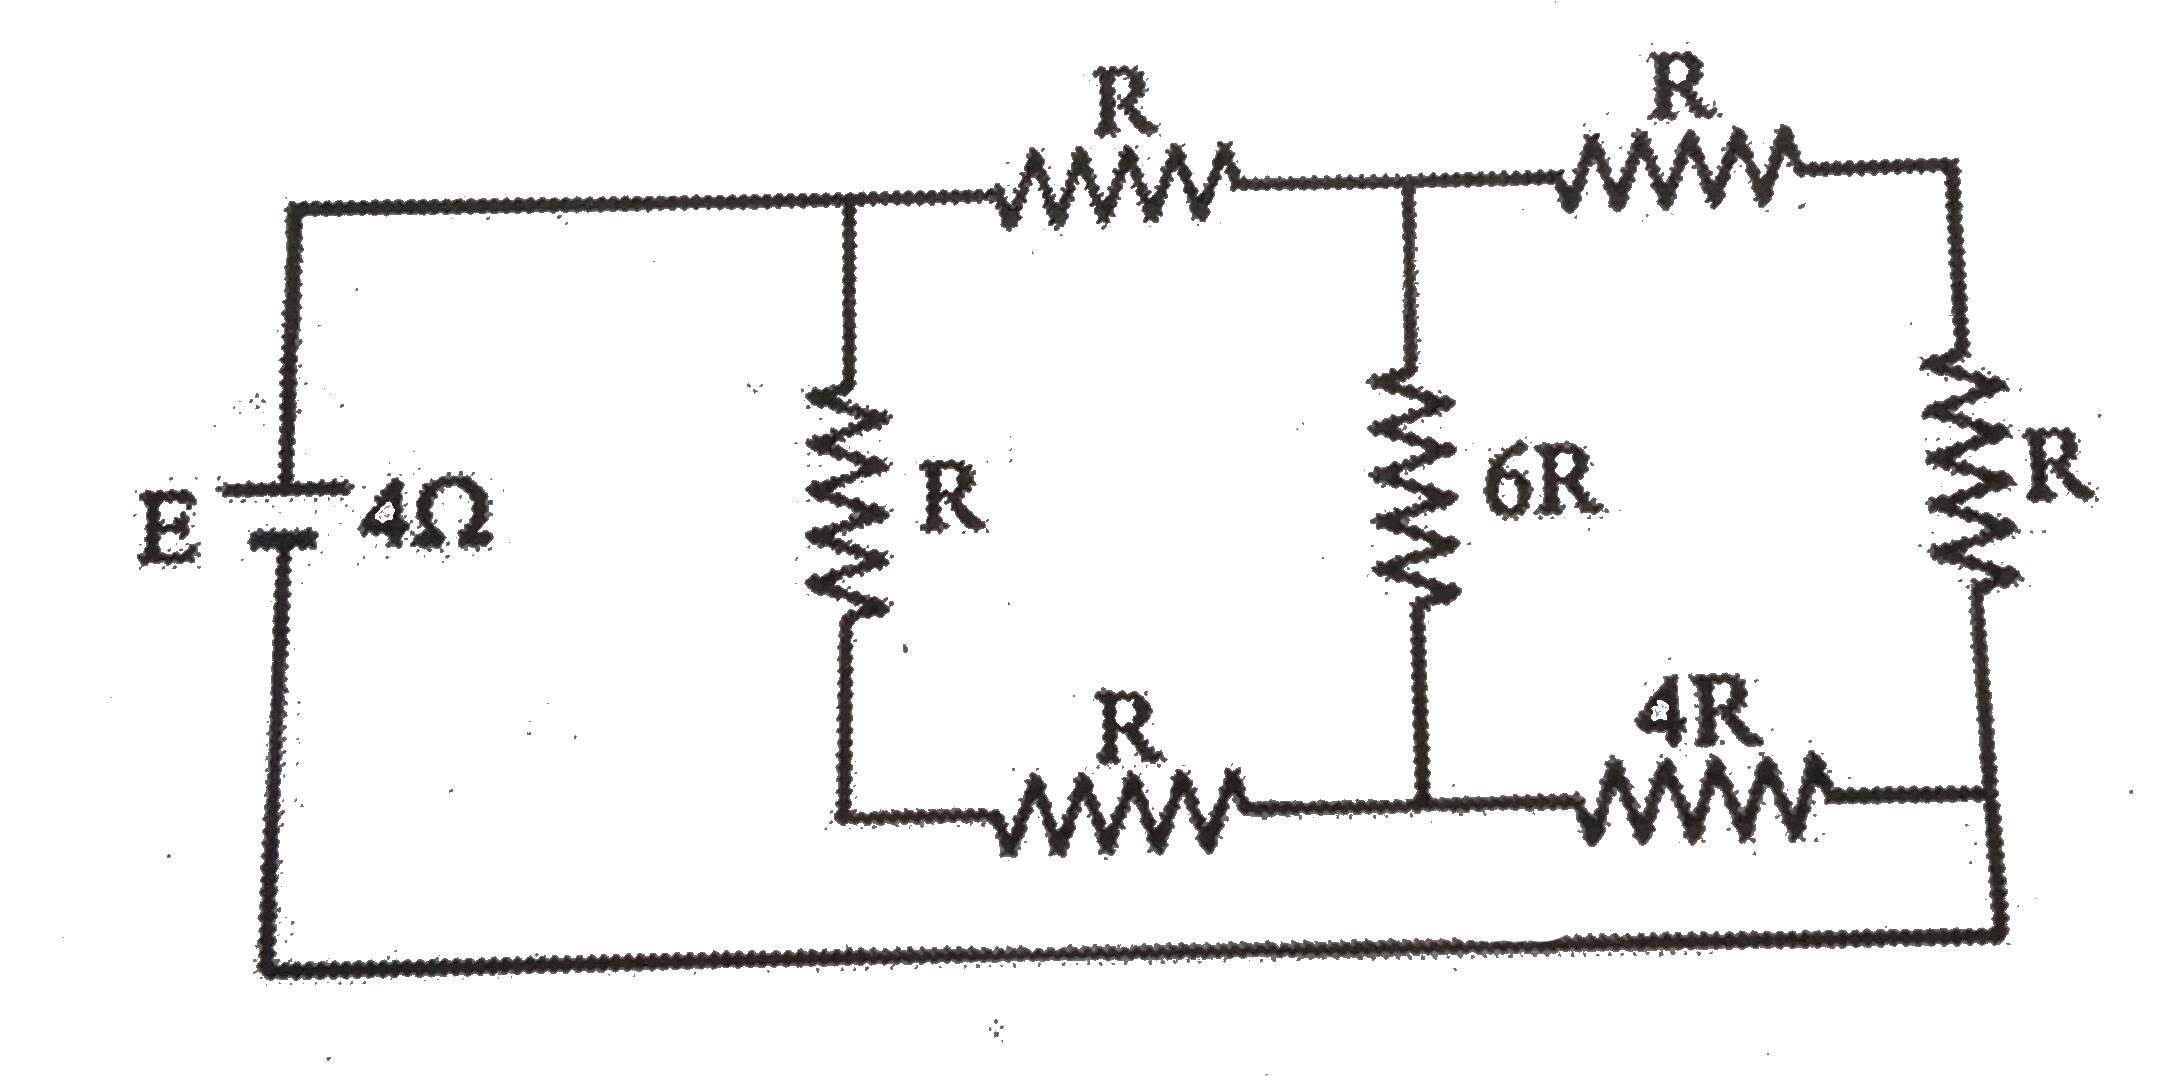 A battery of internal resistance 4 Omega is connected  to the network of resistance as shown. In order to give the maximum power to the network, the value of R should be-